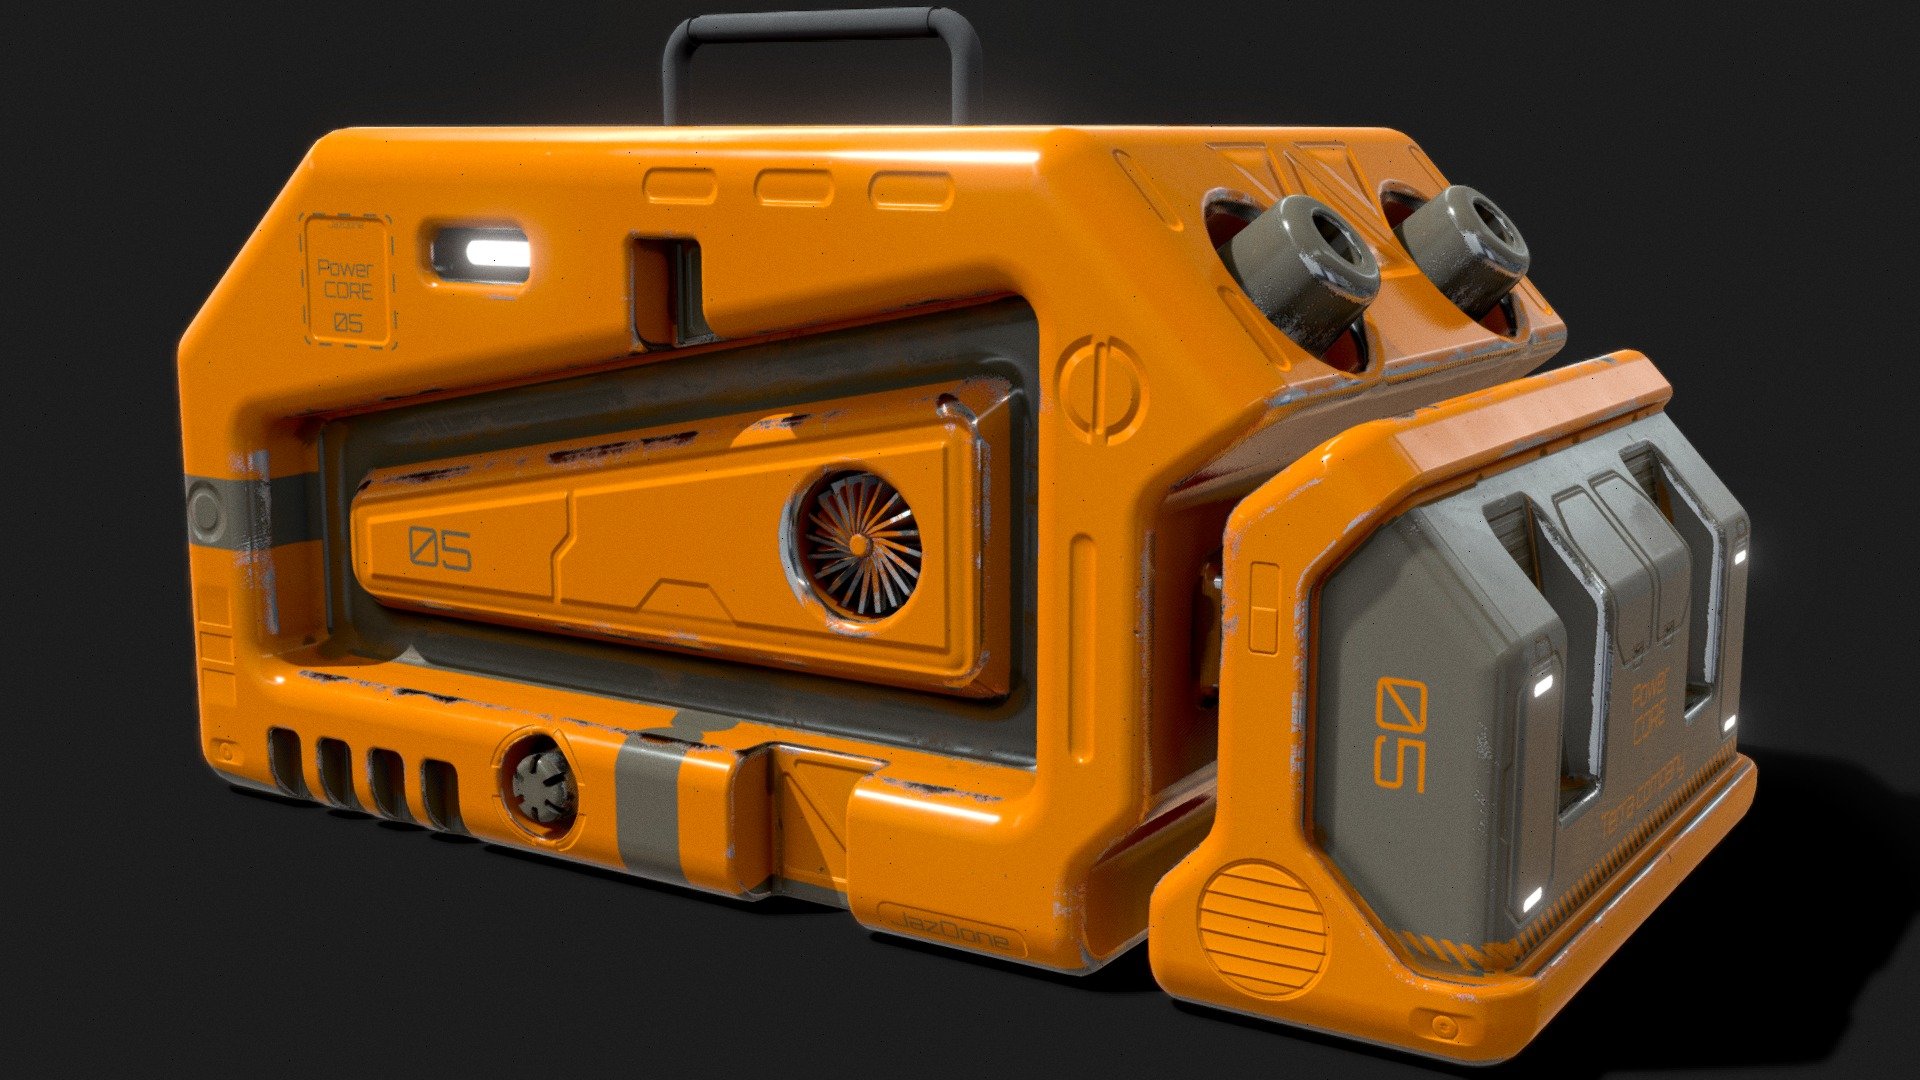 Sci-fi Box made in Plascticity, Blender, Adobe Substance 3D Painter
You can use this model for game, cinematic, etc.

You can order a 3D model from me: jazoone74@gmail.com

If you use my model, please indicate me in the description or in the credits. If you will use my model in commercial projects, please contact me! Formats:

-fbx -obj -blend 
Textures:

-Size 4096x4096p I hope you like it! Please rate this product if you’re satisfied - Sci-fi Box - Download Free 3D model by JazOone 3d model